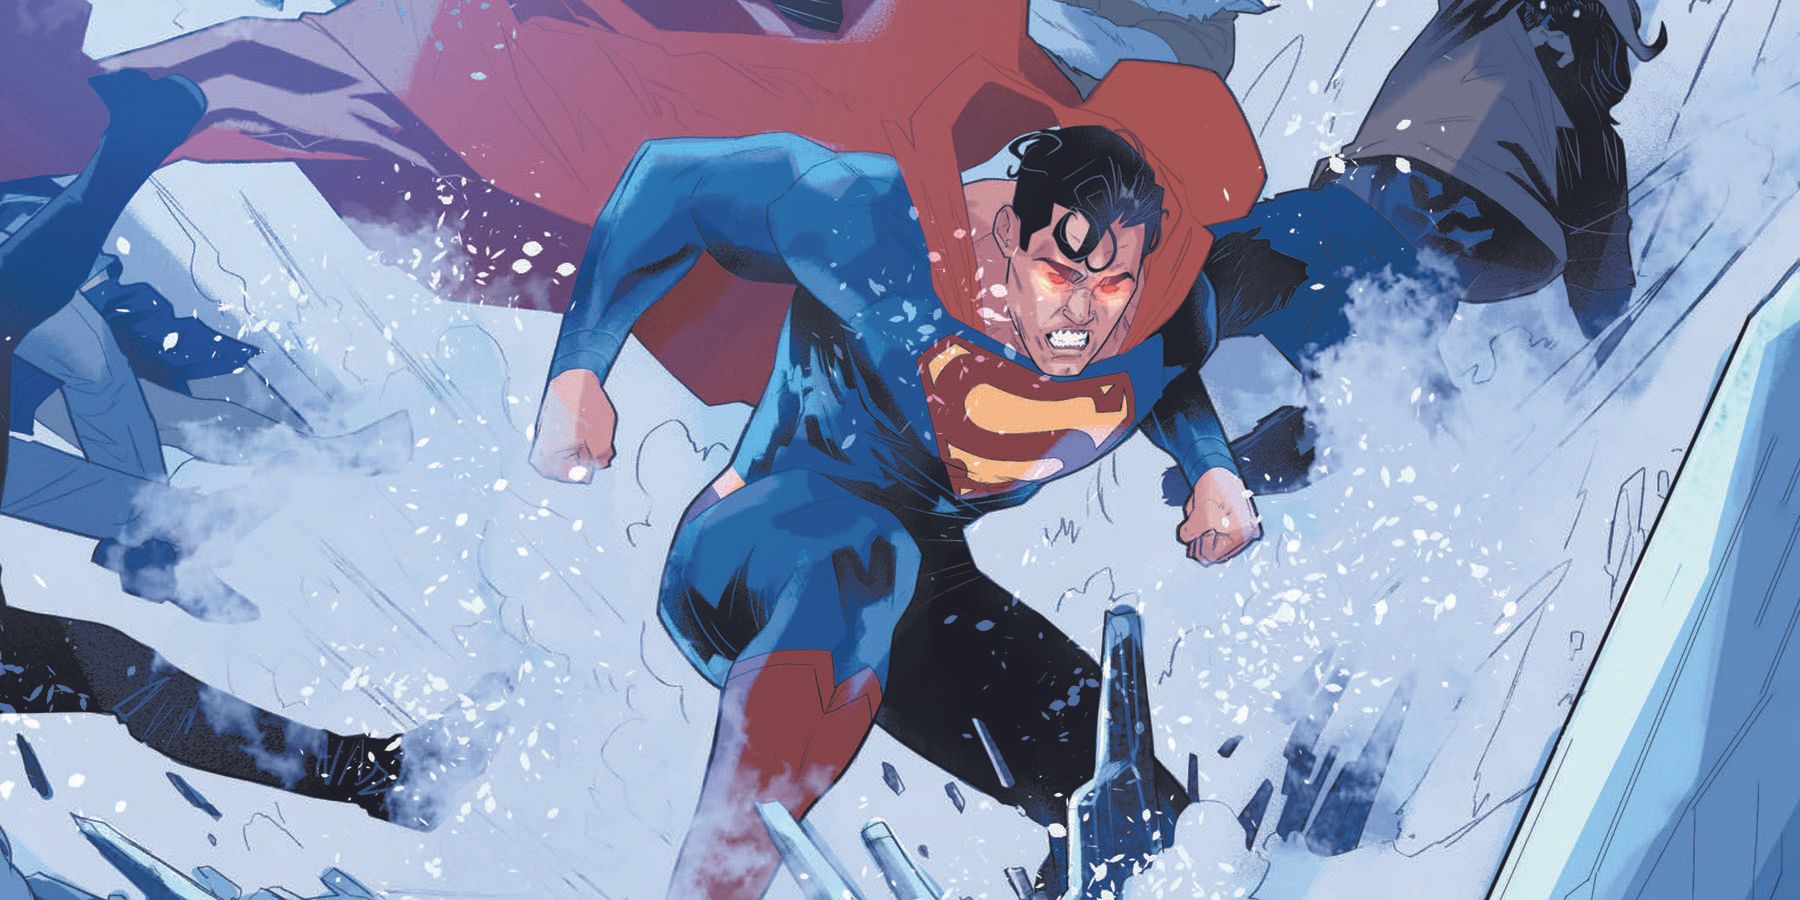 Superman jumps into action in Don't Stop.